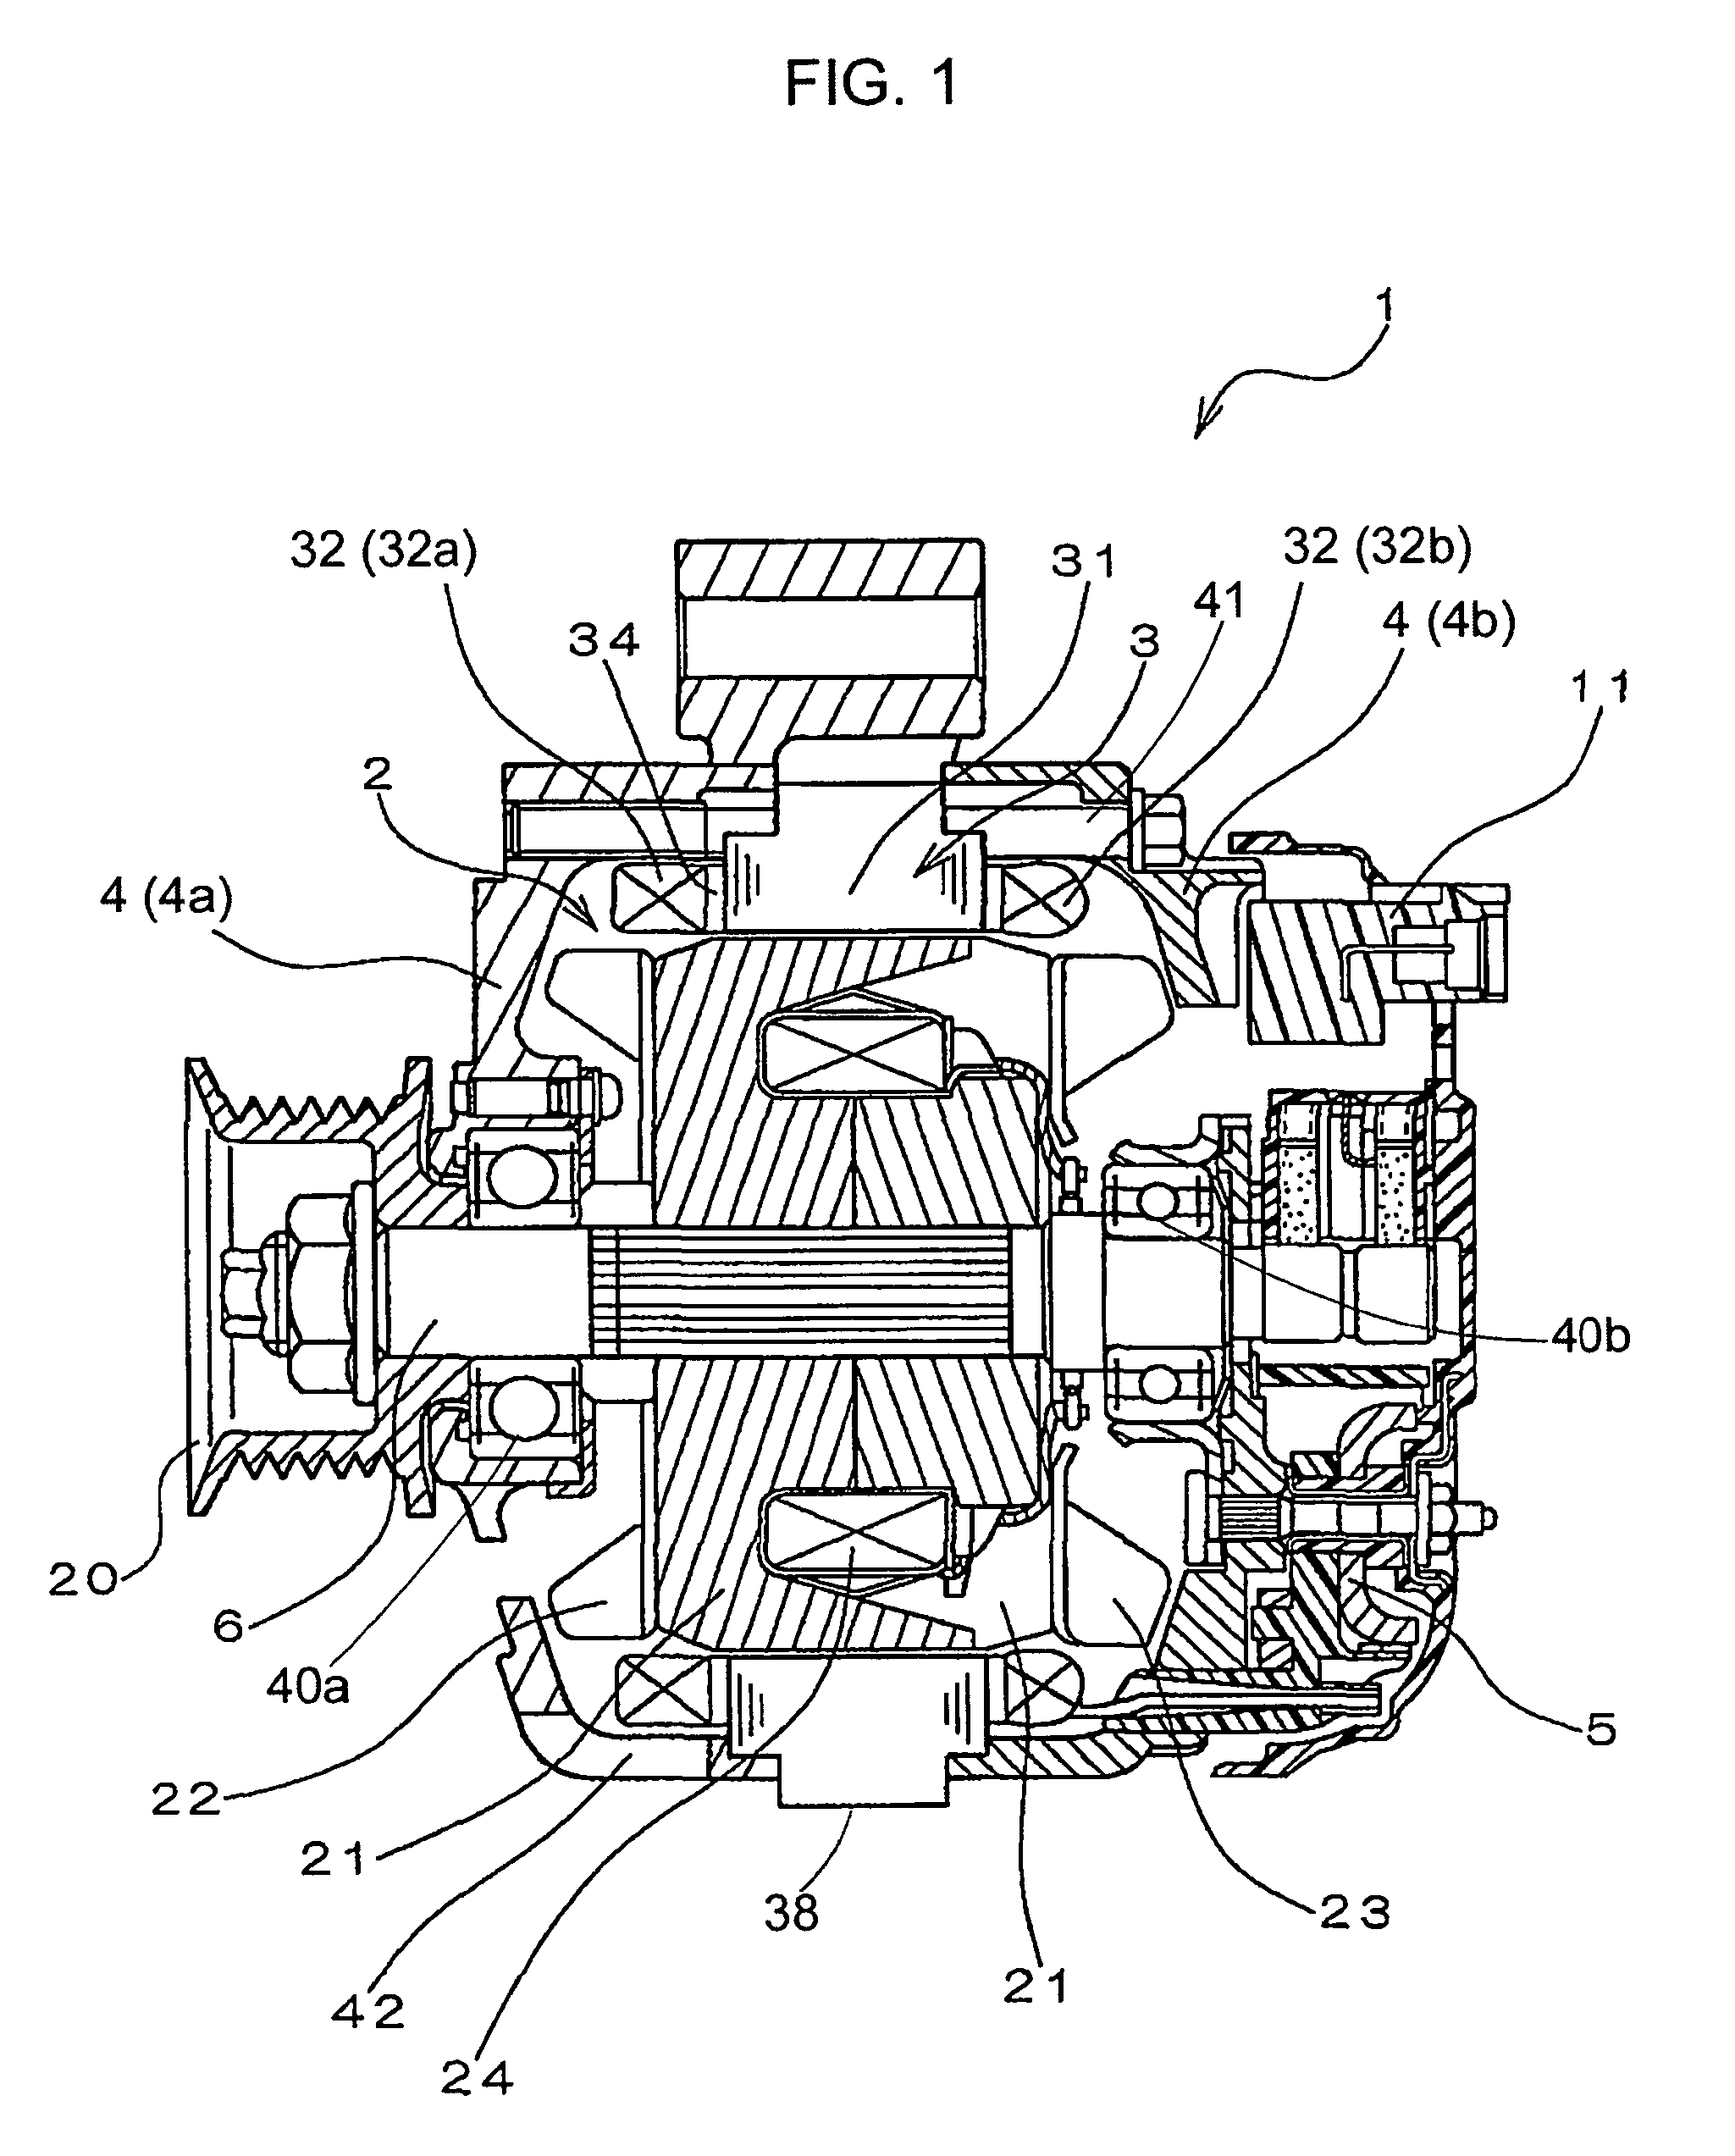 Rotary electric machine with stator outer surface designed to enhance heat dissipation